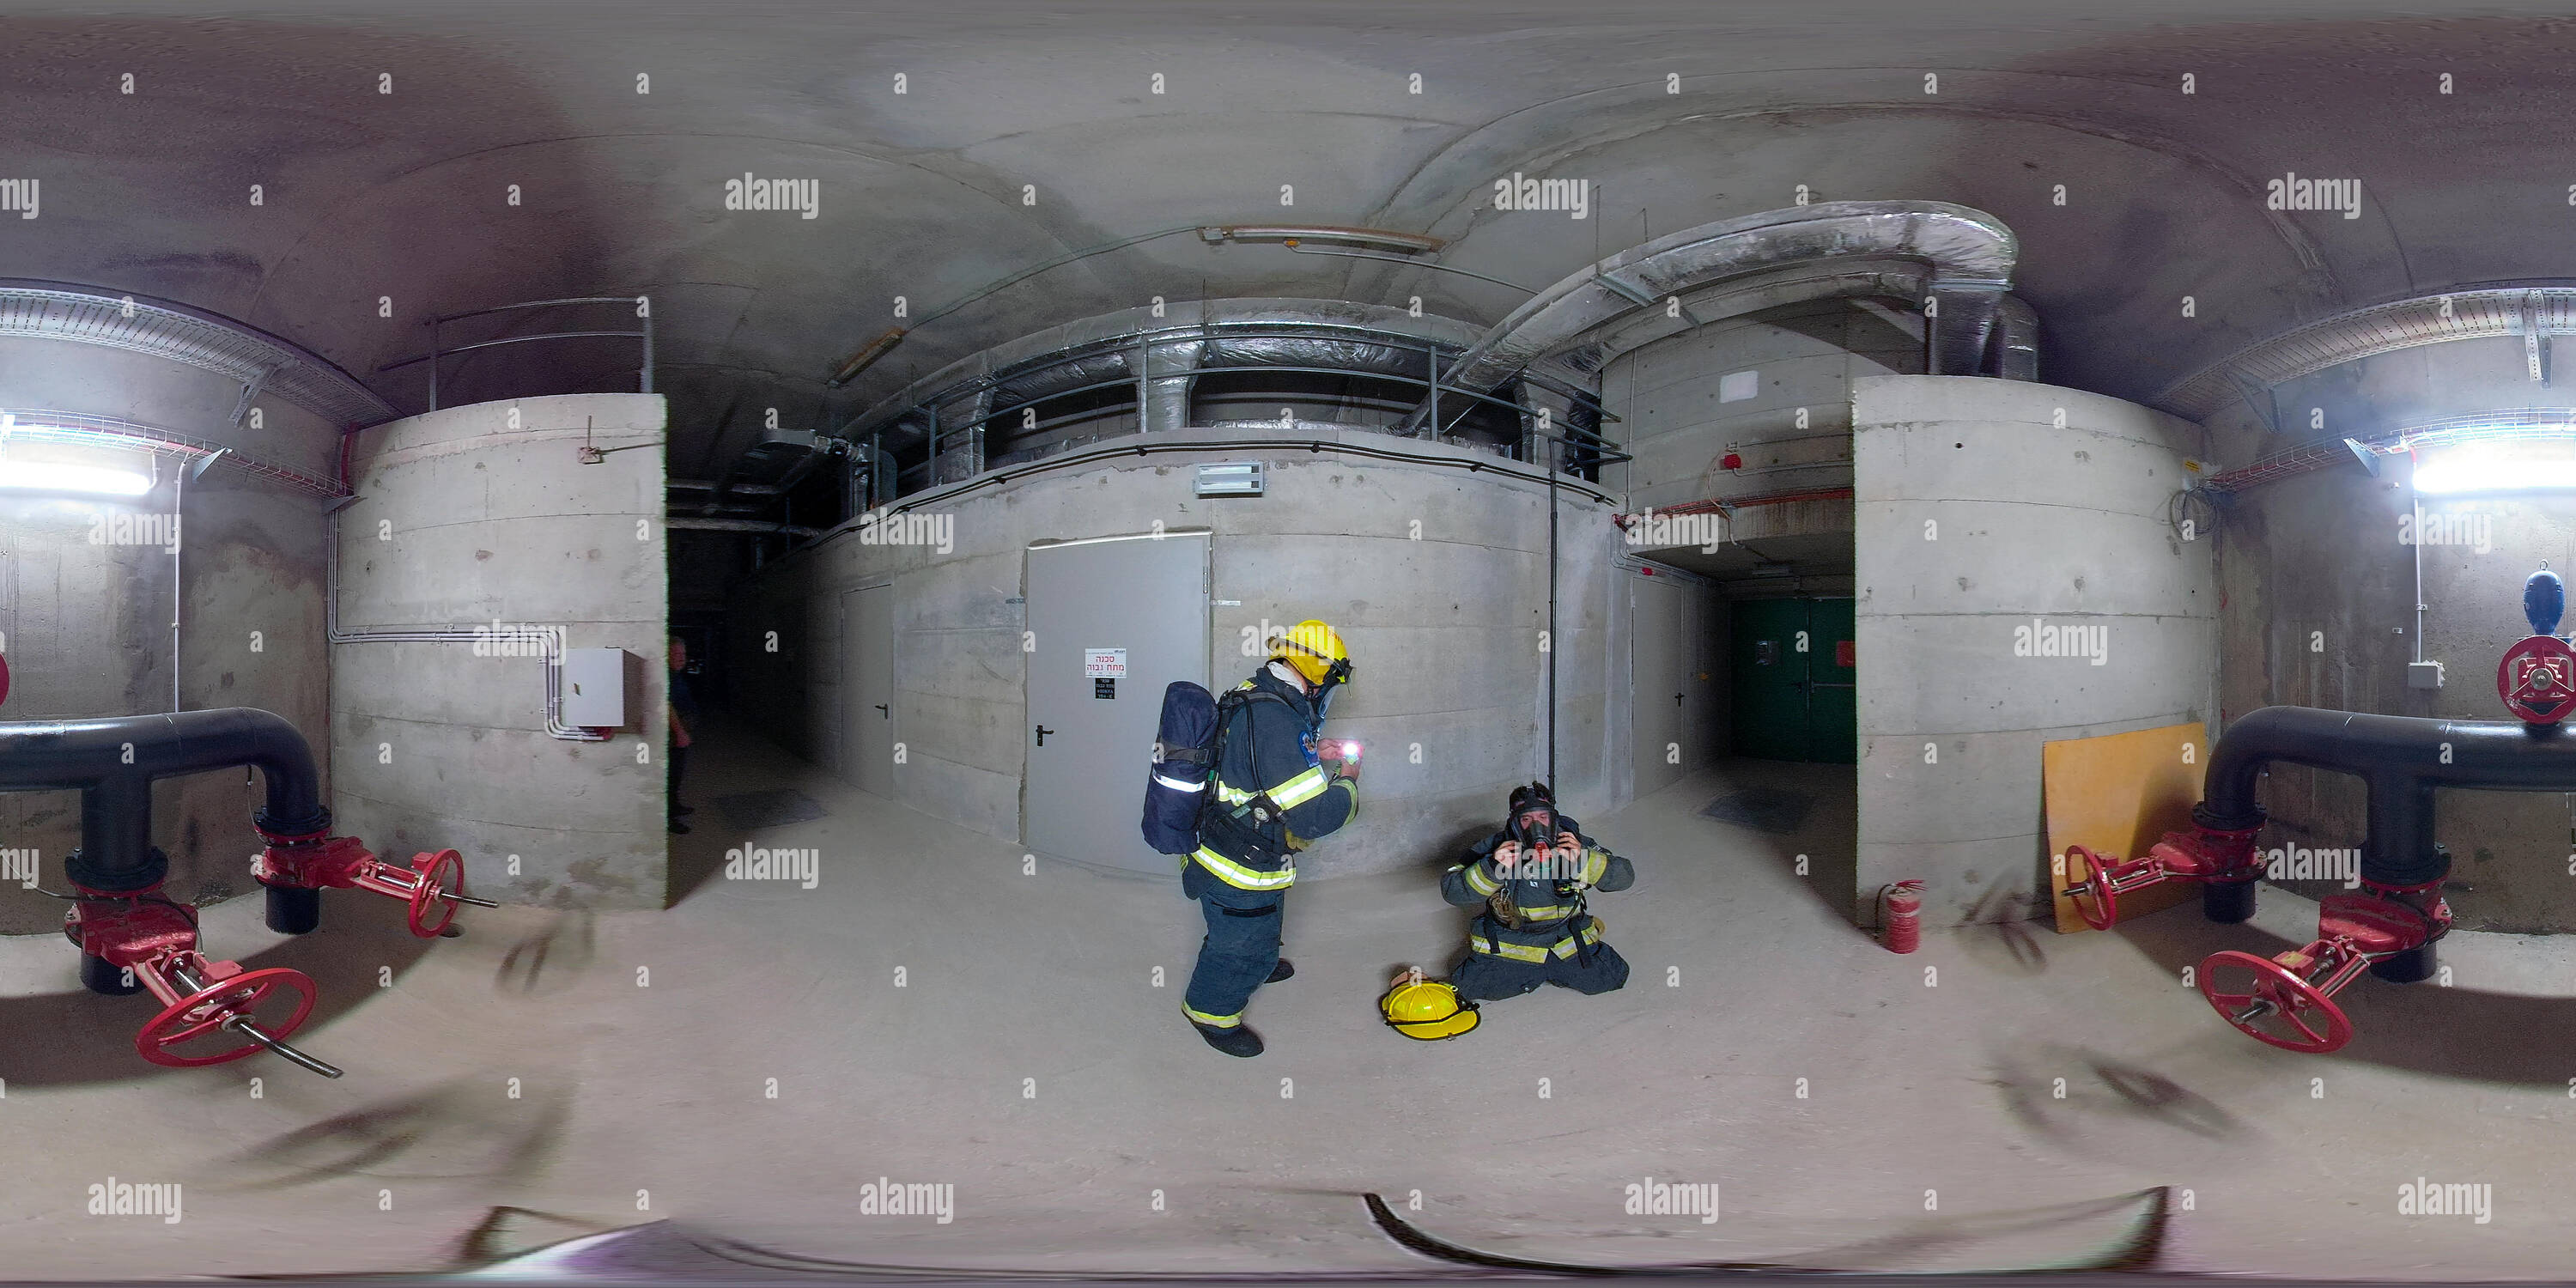 360 degree panoramic view of Firefighters rush to rescue people in car accident during a drill in Kashish Tunnels, Road 6, Israel. 360 photo vr panorama 2:1 aspect ratio for VR ap